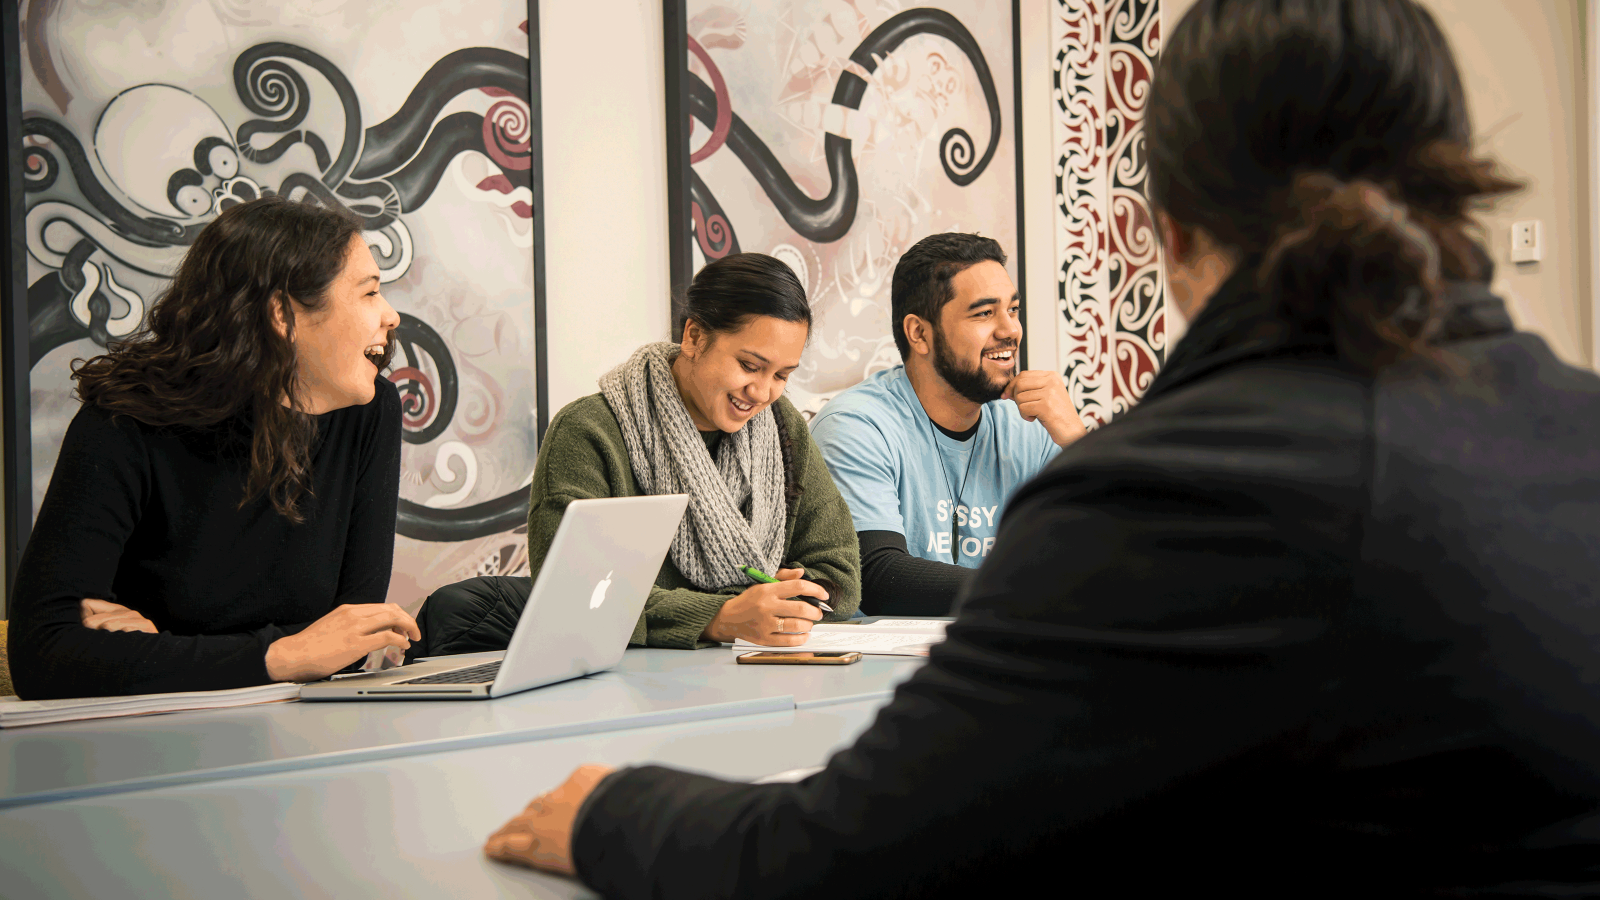 Students sit at a table with a laptop and enjoy a conversation – on the wall in the background, there is an artistic version of an octopus.